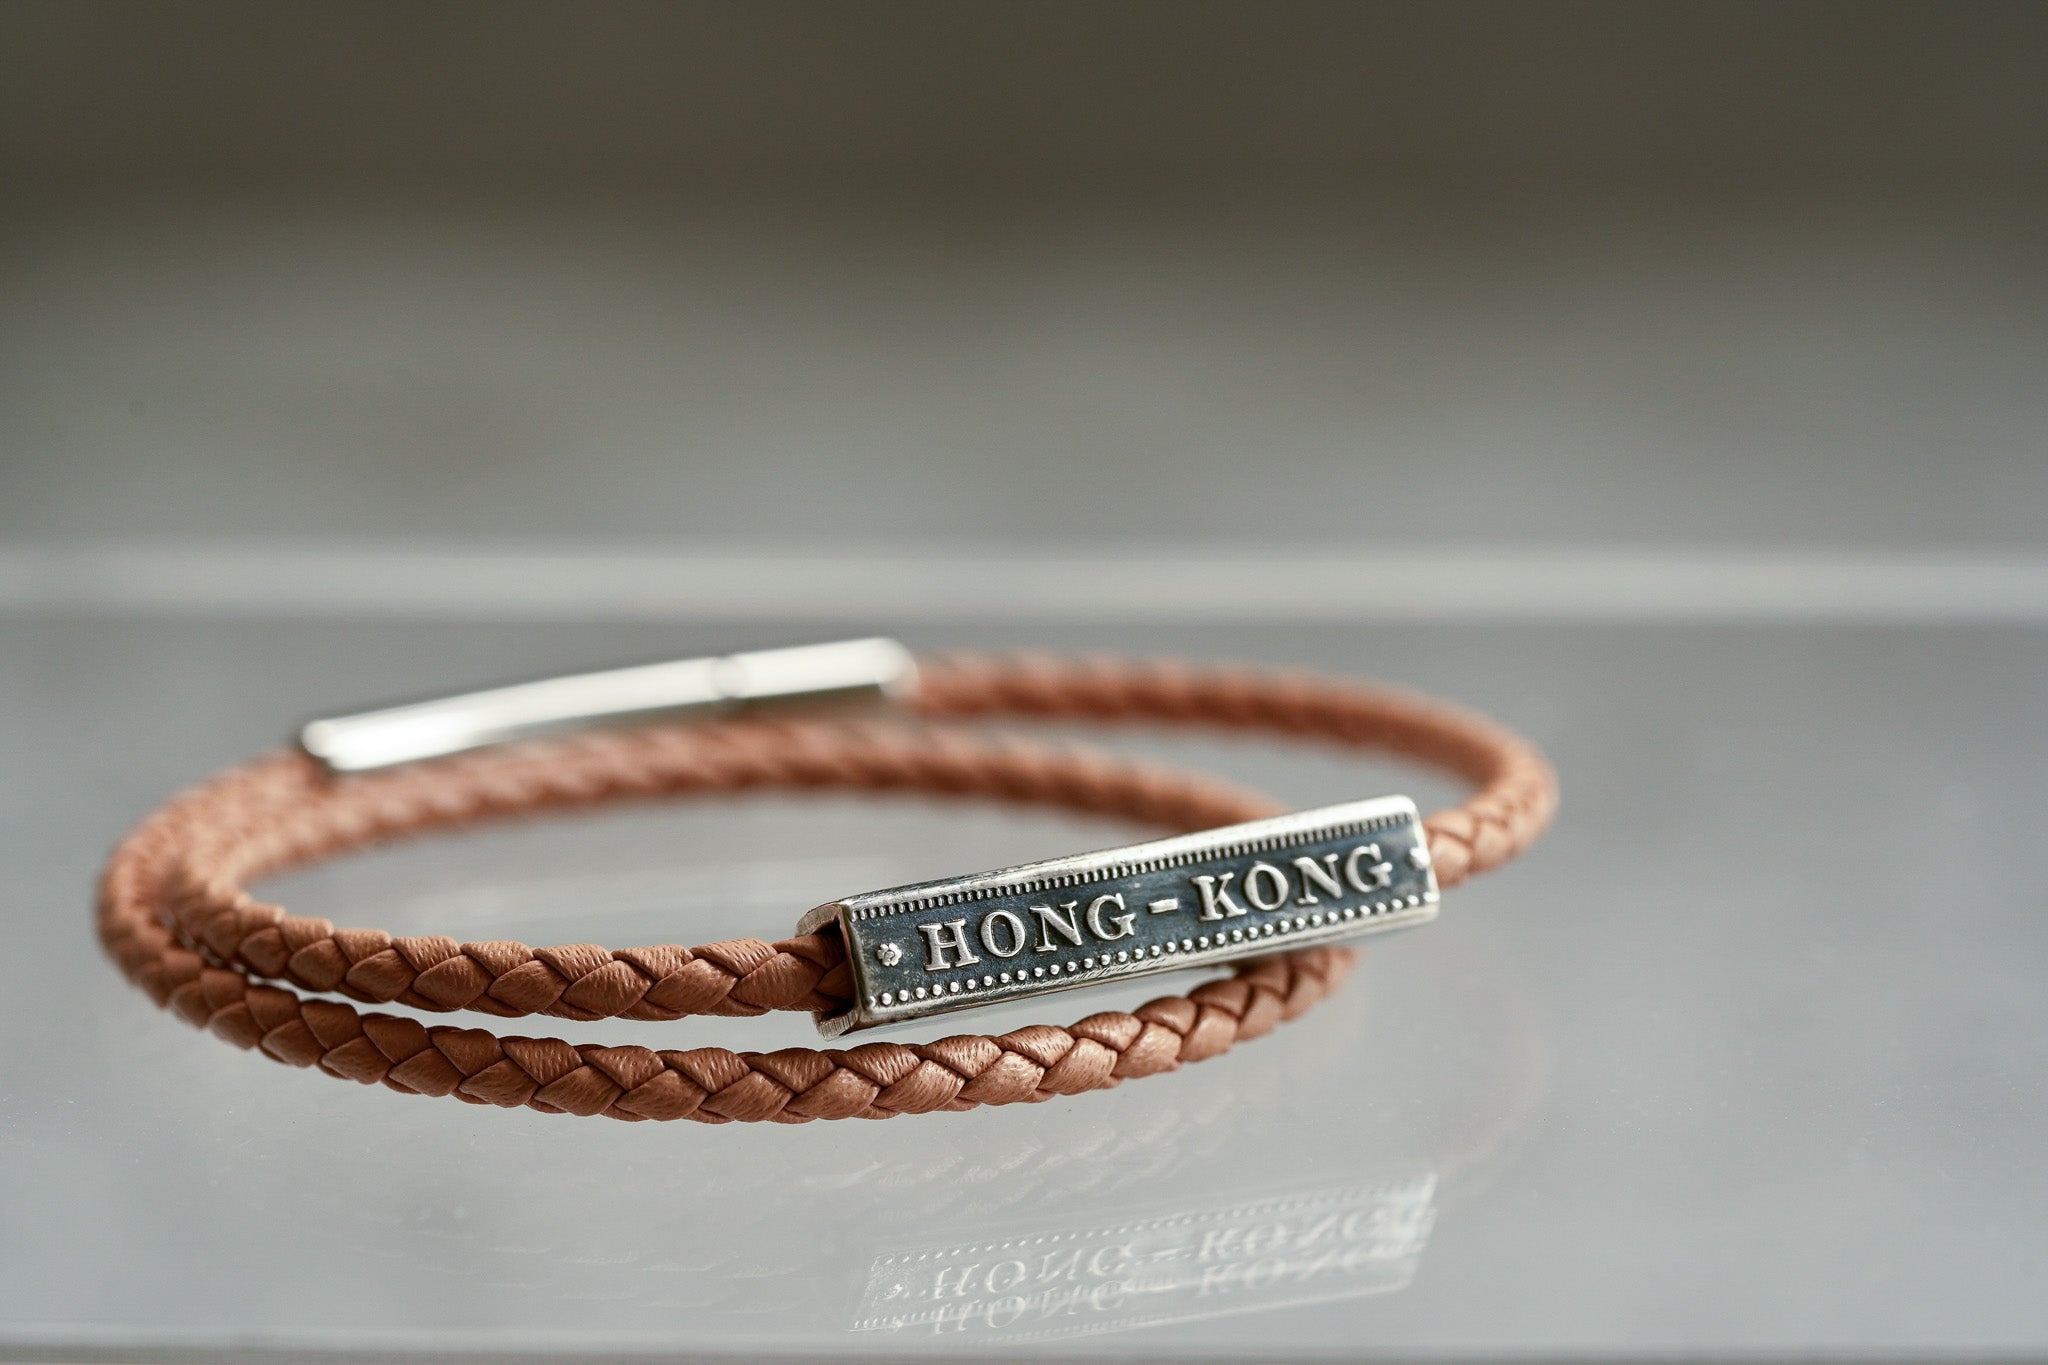 Leather Bracelet with Hong Kong 50 cents